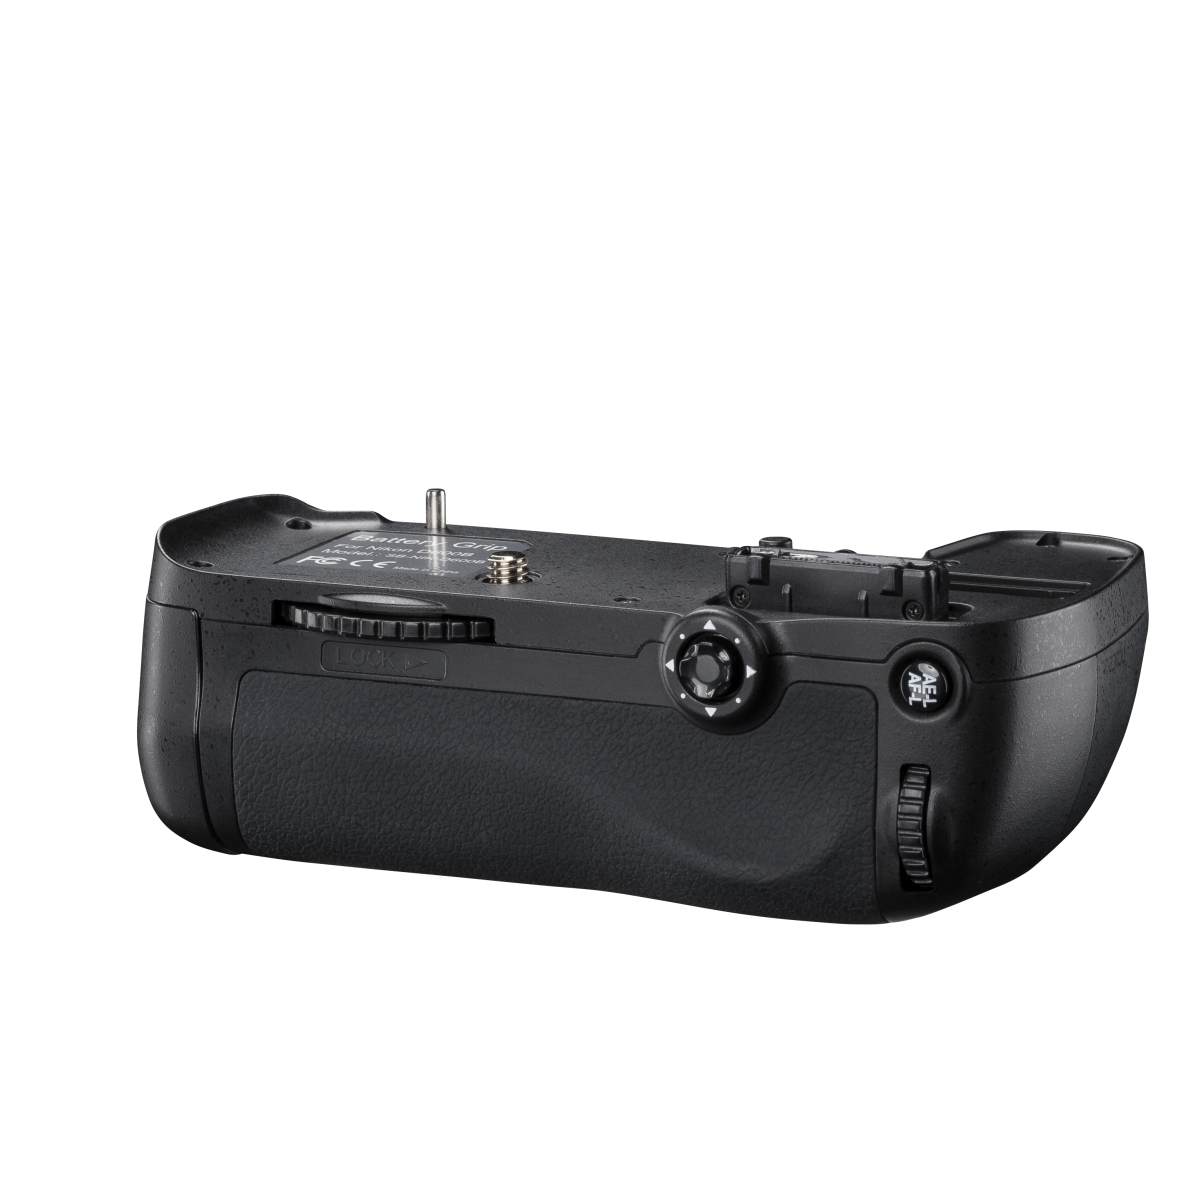 Walimex pro Battery Grip for Nikon D600